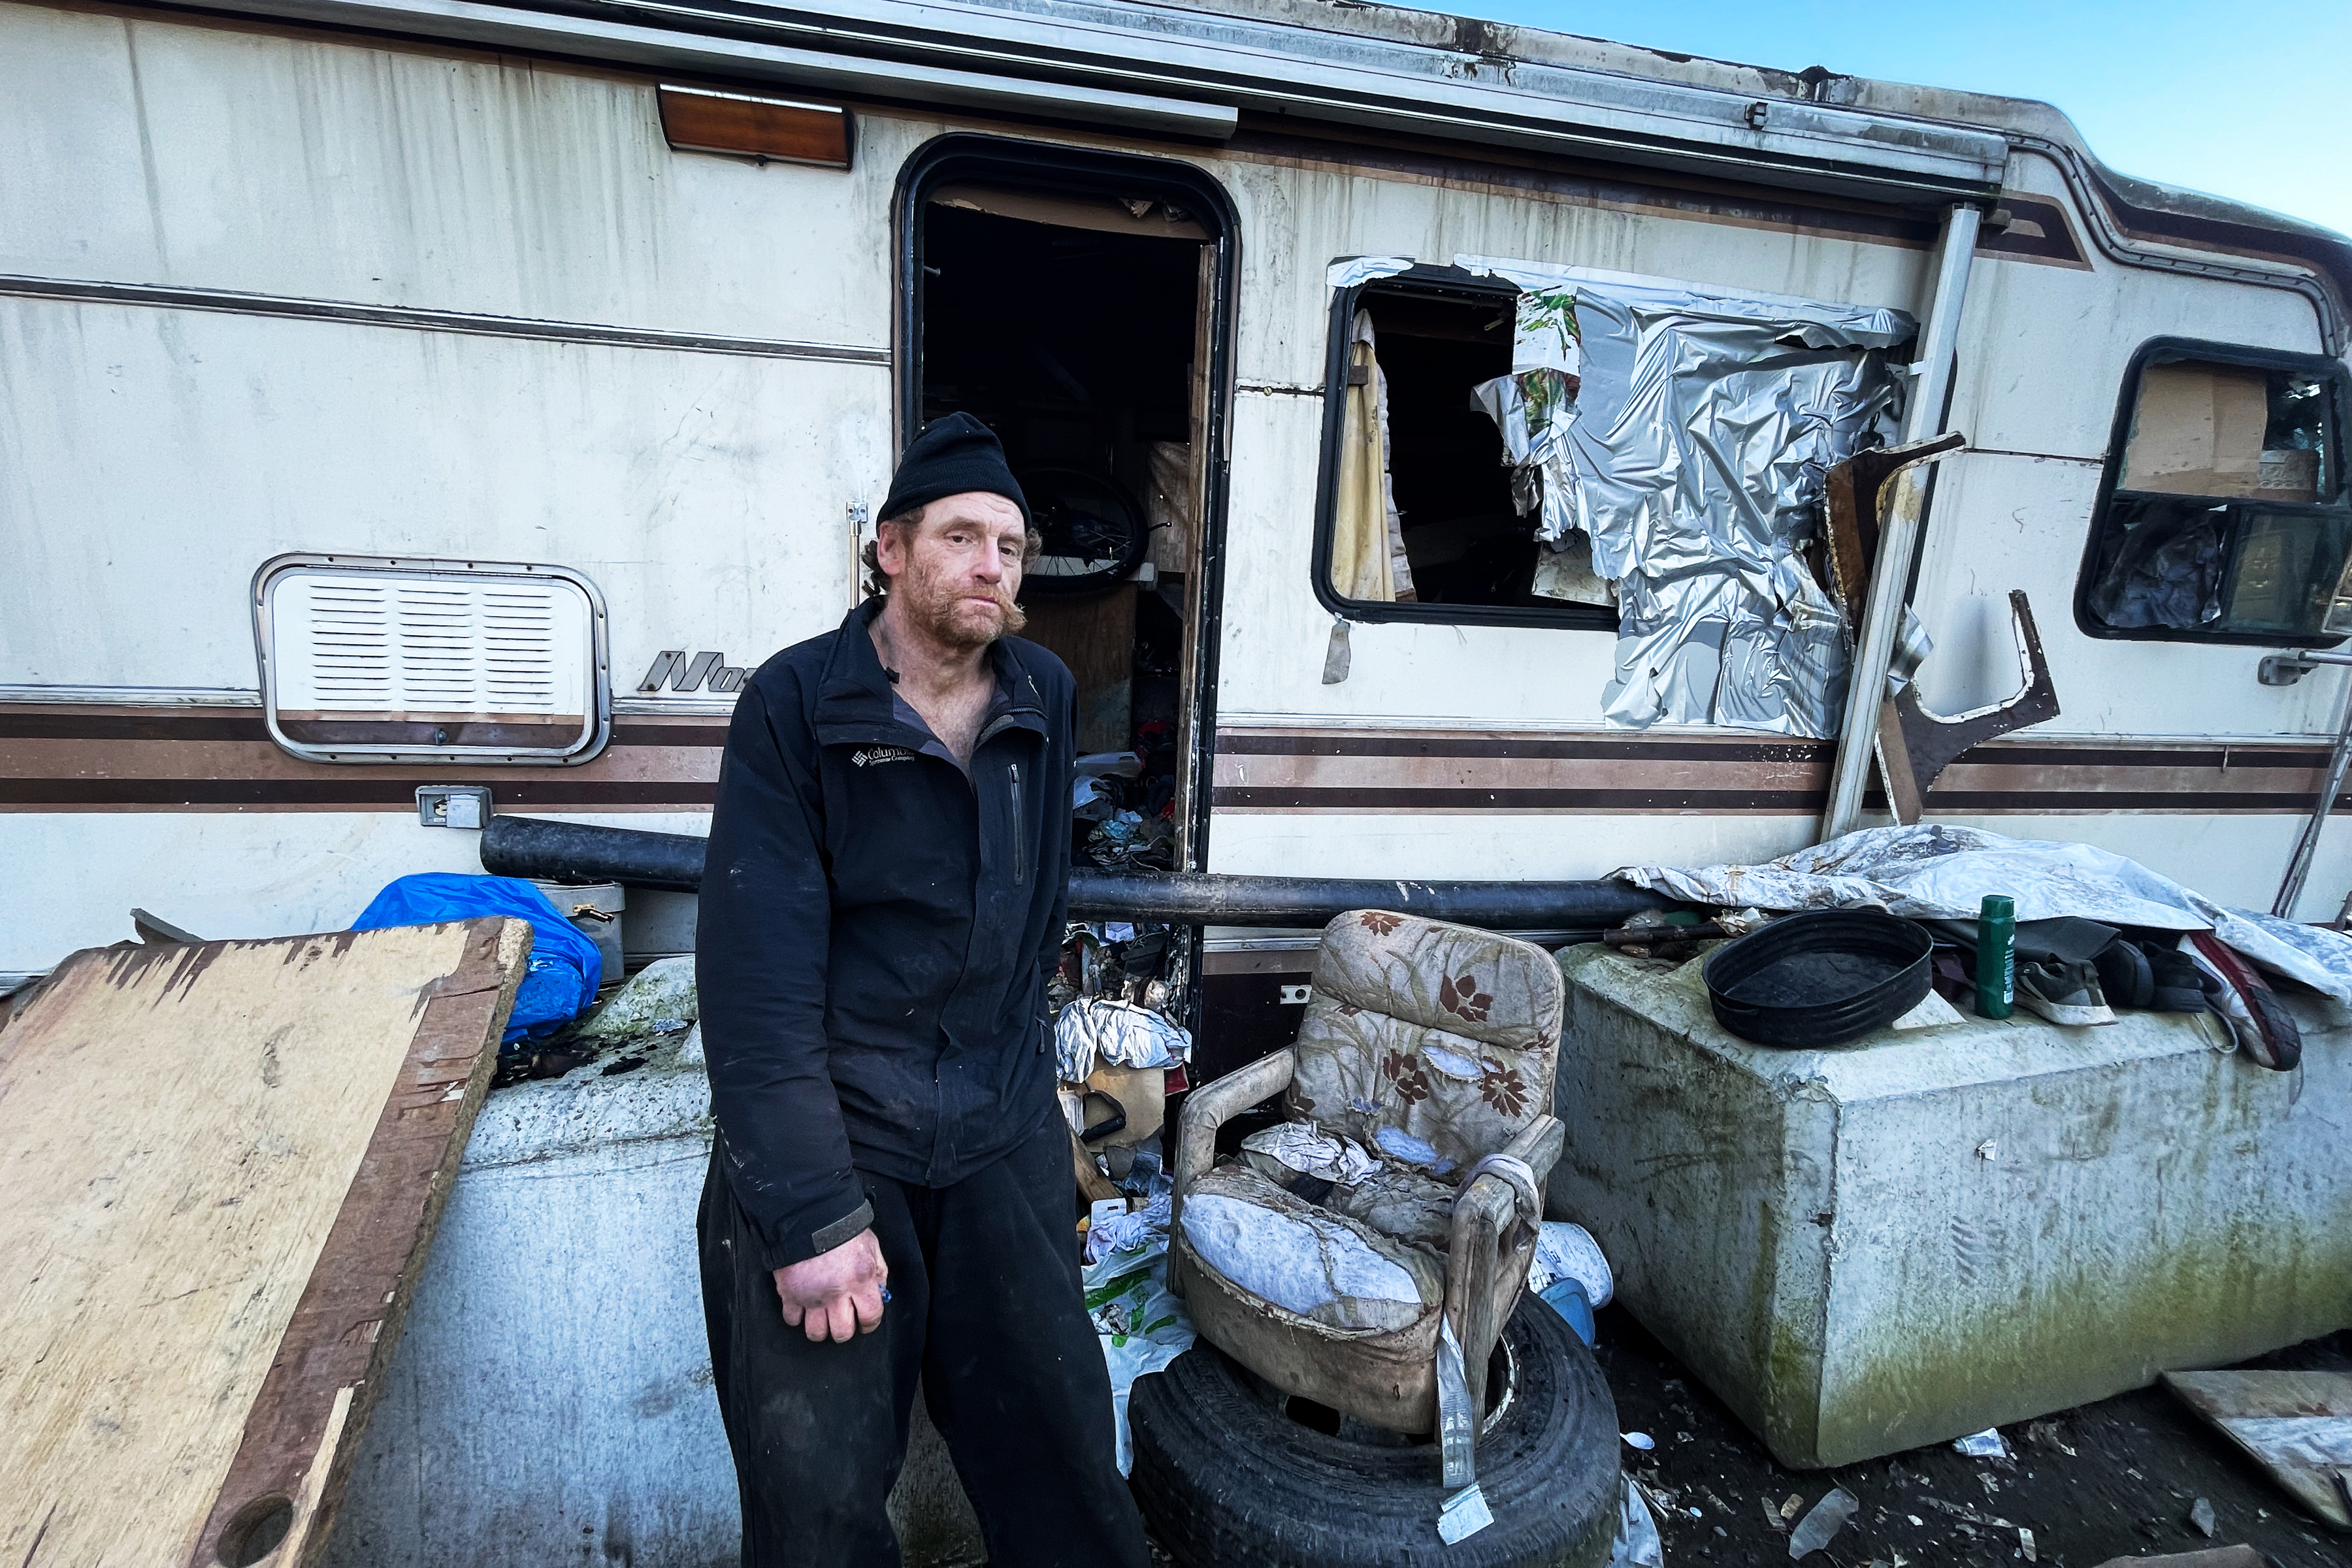 A photo shows Paul Hunter standing in front of an RV. Trash and debris surrounds him.